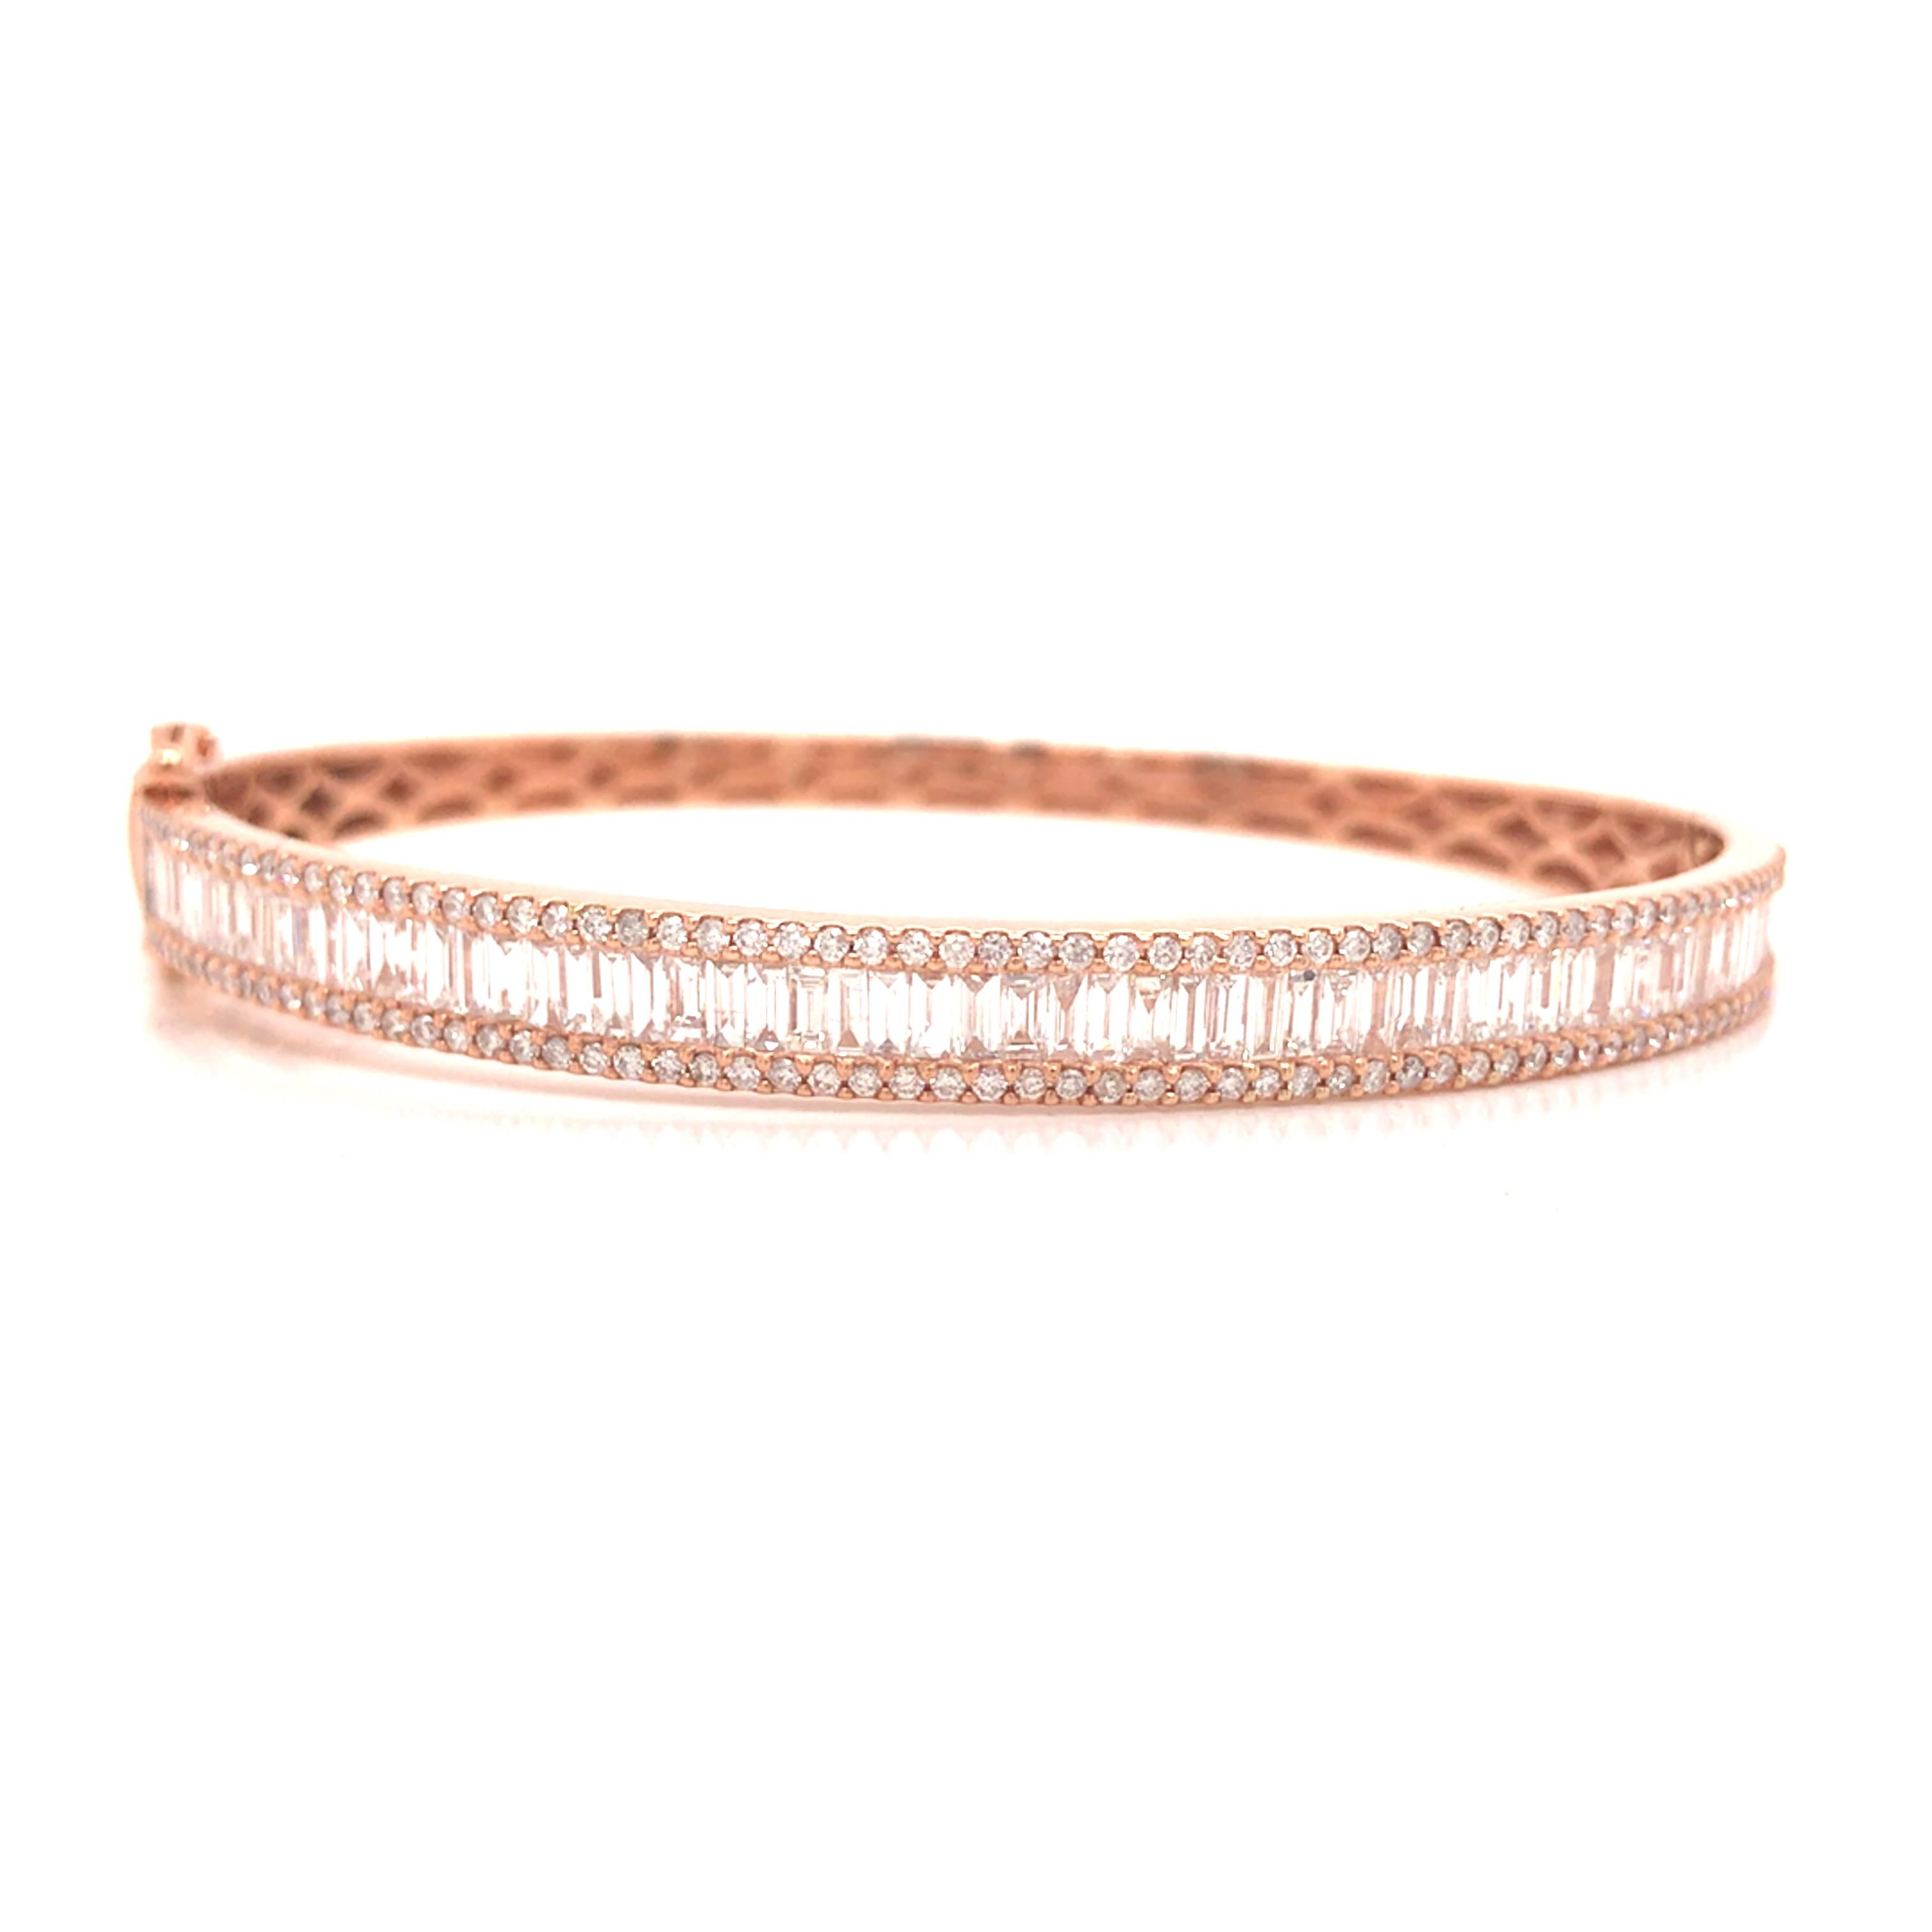 Round and Baguette Diamond Bangle in 18K Rose Gold.  Round Brilliant Cut and Baguette Diamonds weighing 2.72 carat total weight, G-H in color and VS-SI in clarity are expertly set.  The Bangle measures 6 1/2 inch and 1/4 inch in width.  14.738 grams.